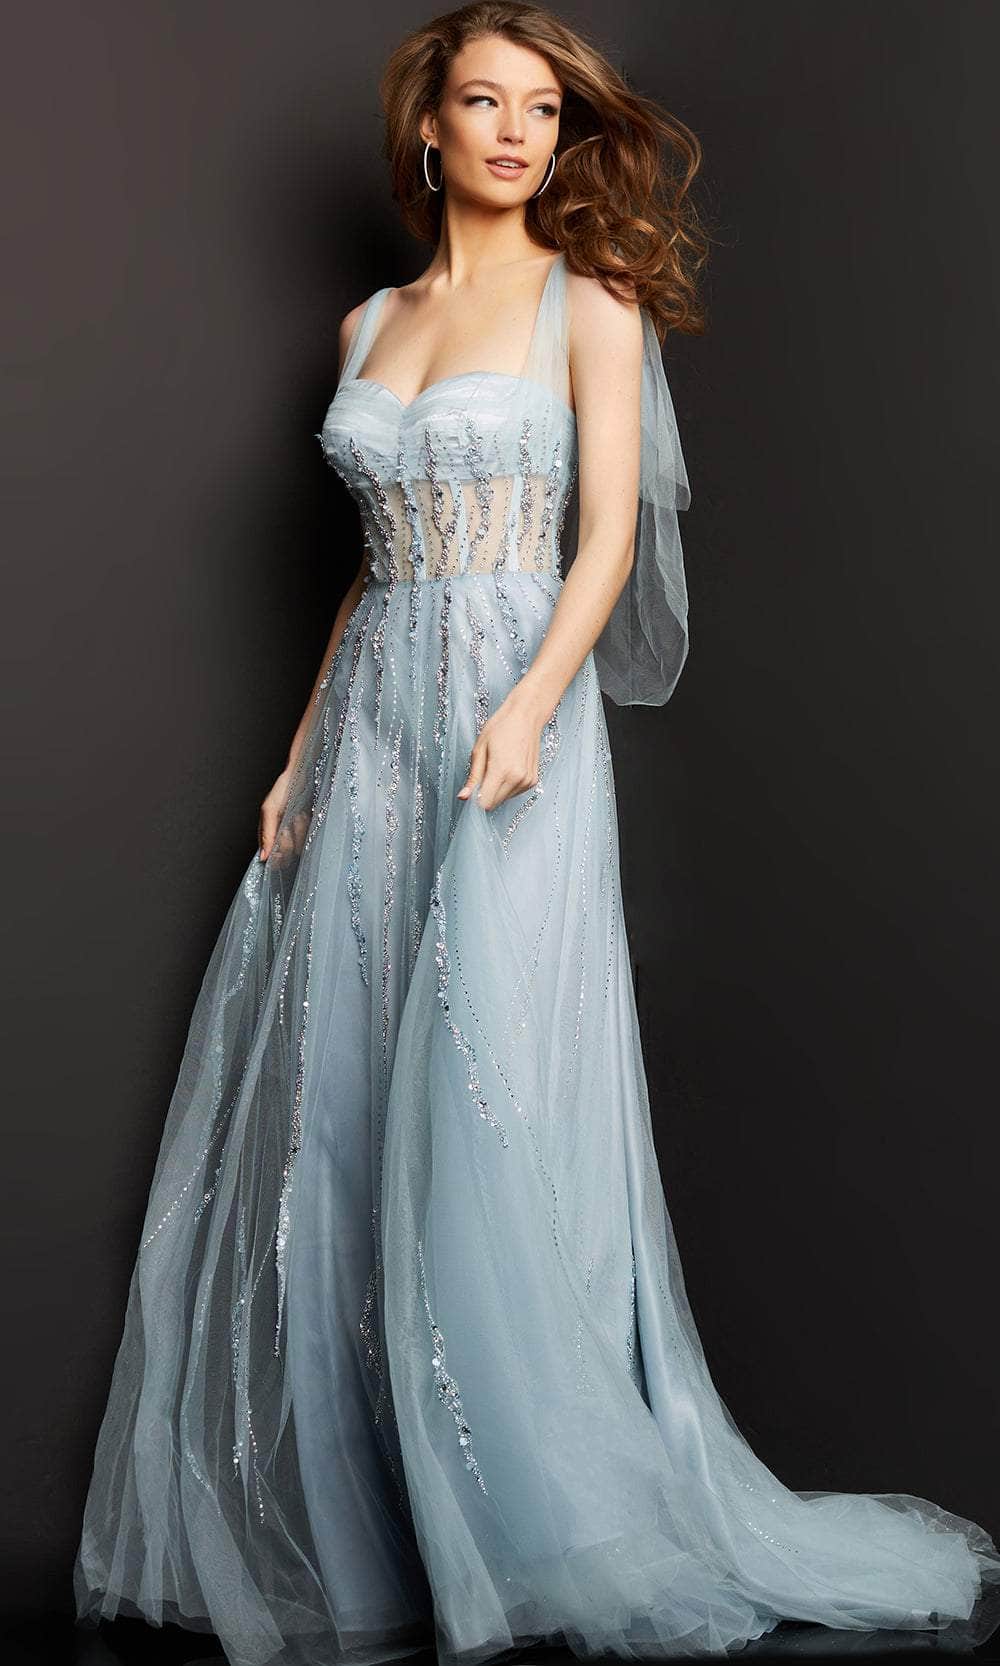 Jovani 08487 - Corset Sheer Bodice Tulle Gown Special Occasion Dress